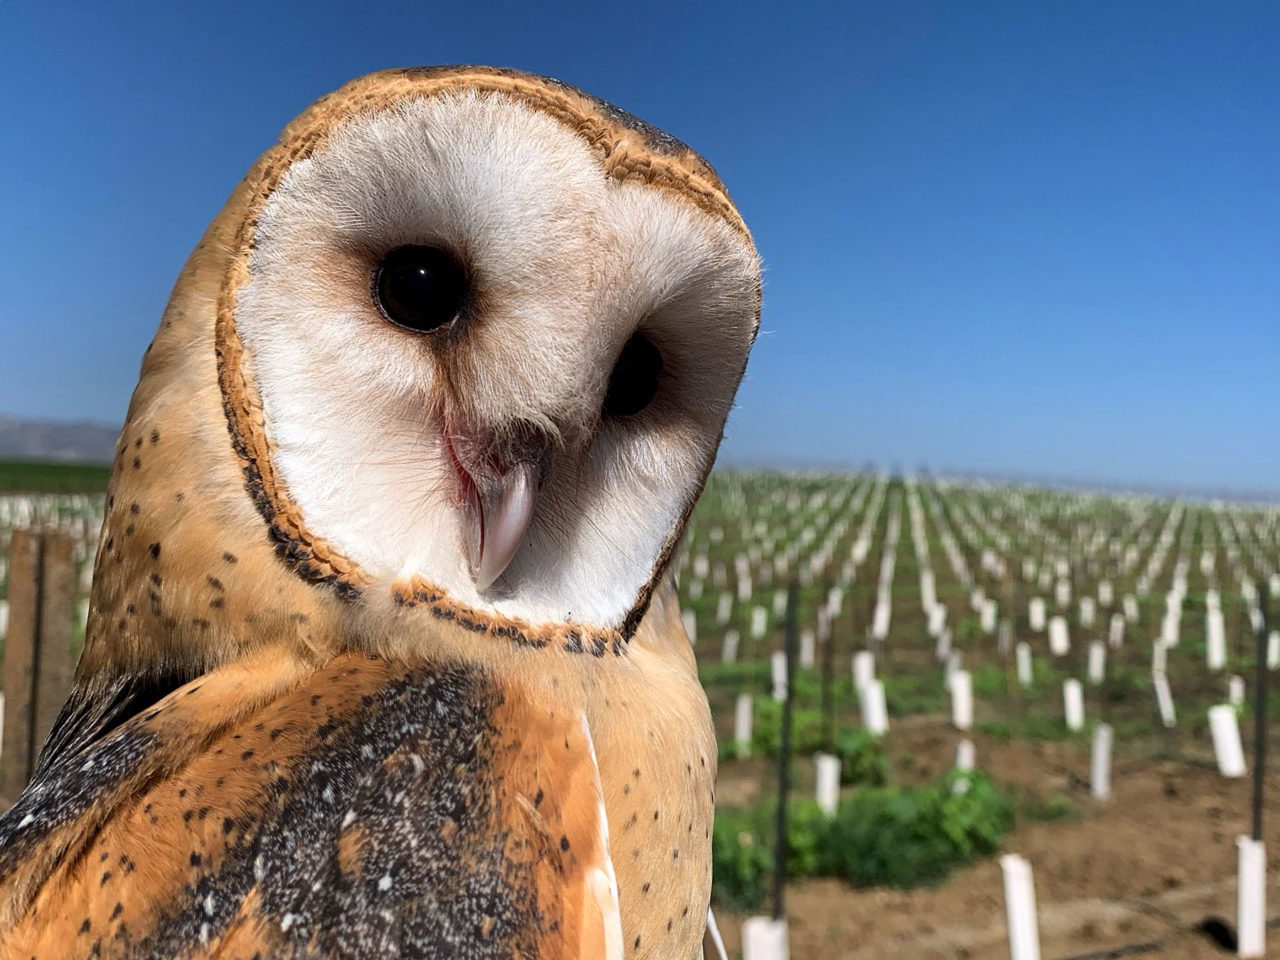 Research from scientists at Humboldt State University estimated that a family of Barn Owls killed 3,000 rodents in California vineyards over the course of a single year. Photo by Ryan Bourbour.